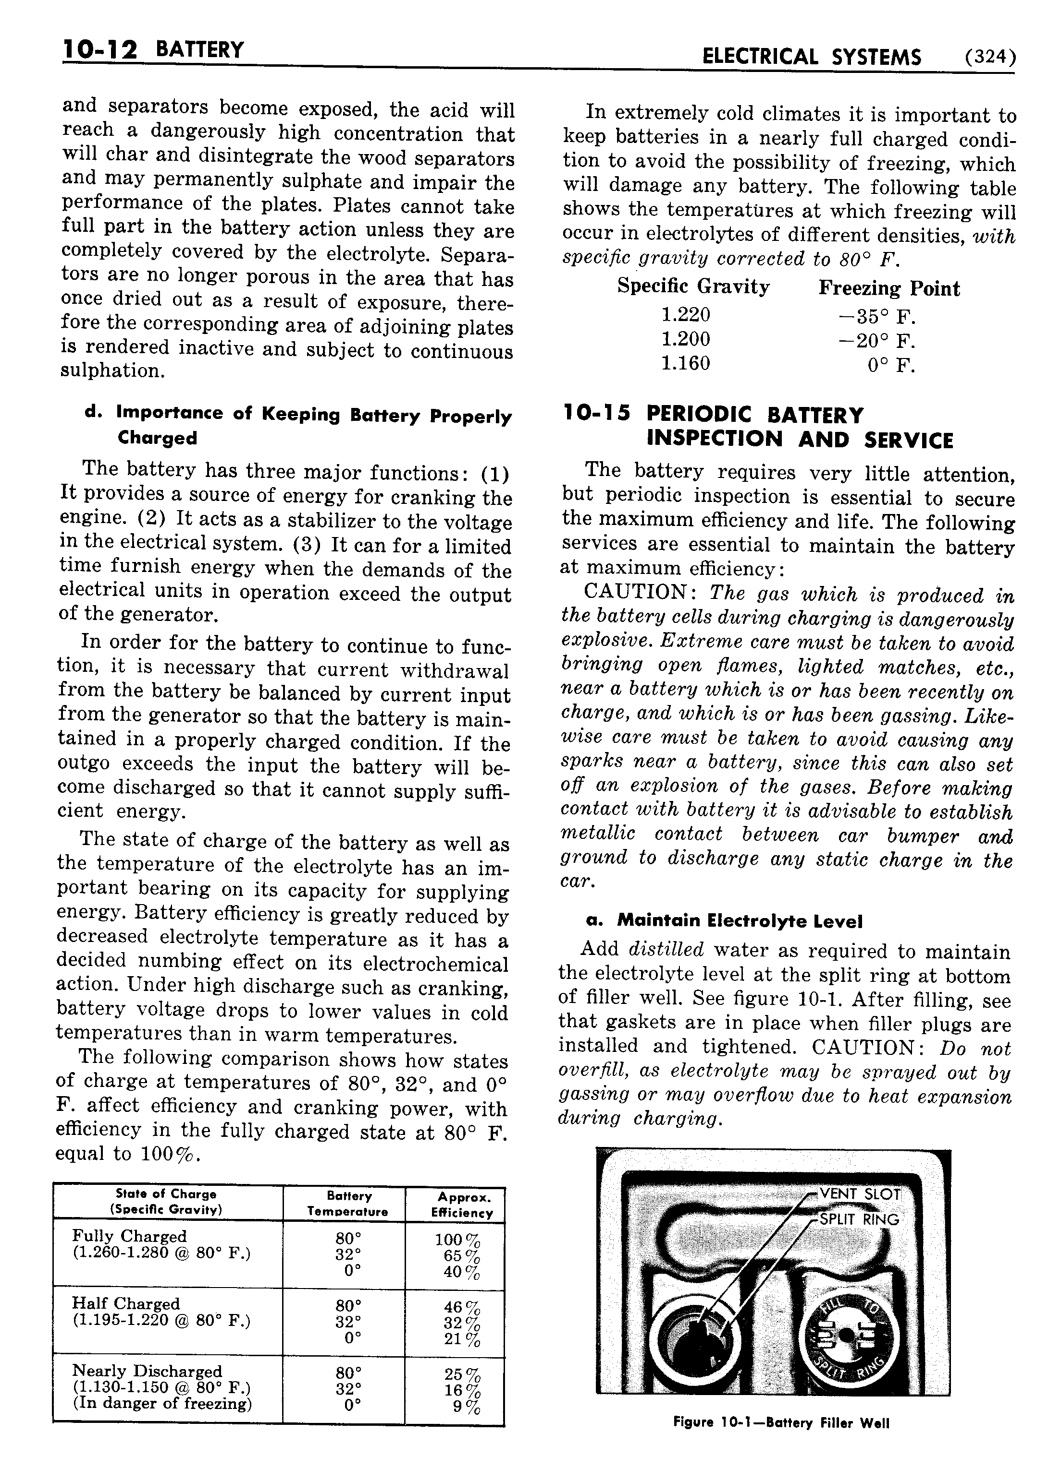 n_11 1954 Buick Shop Manual - Electrical Systems-012-012.jpg